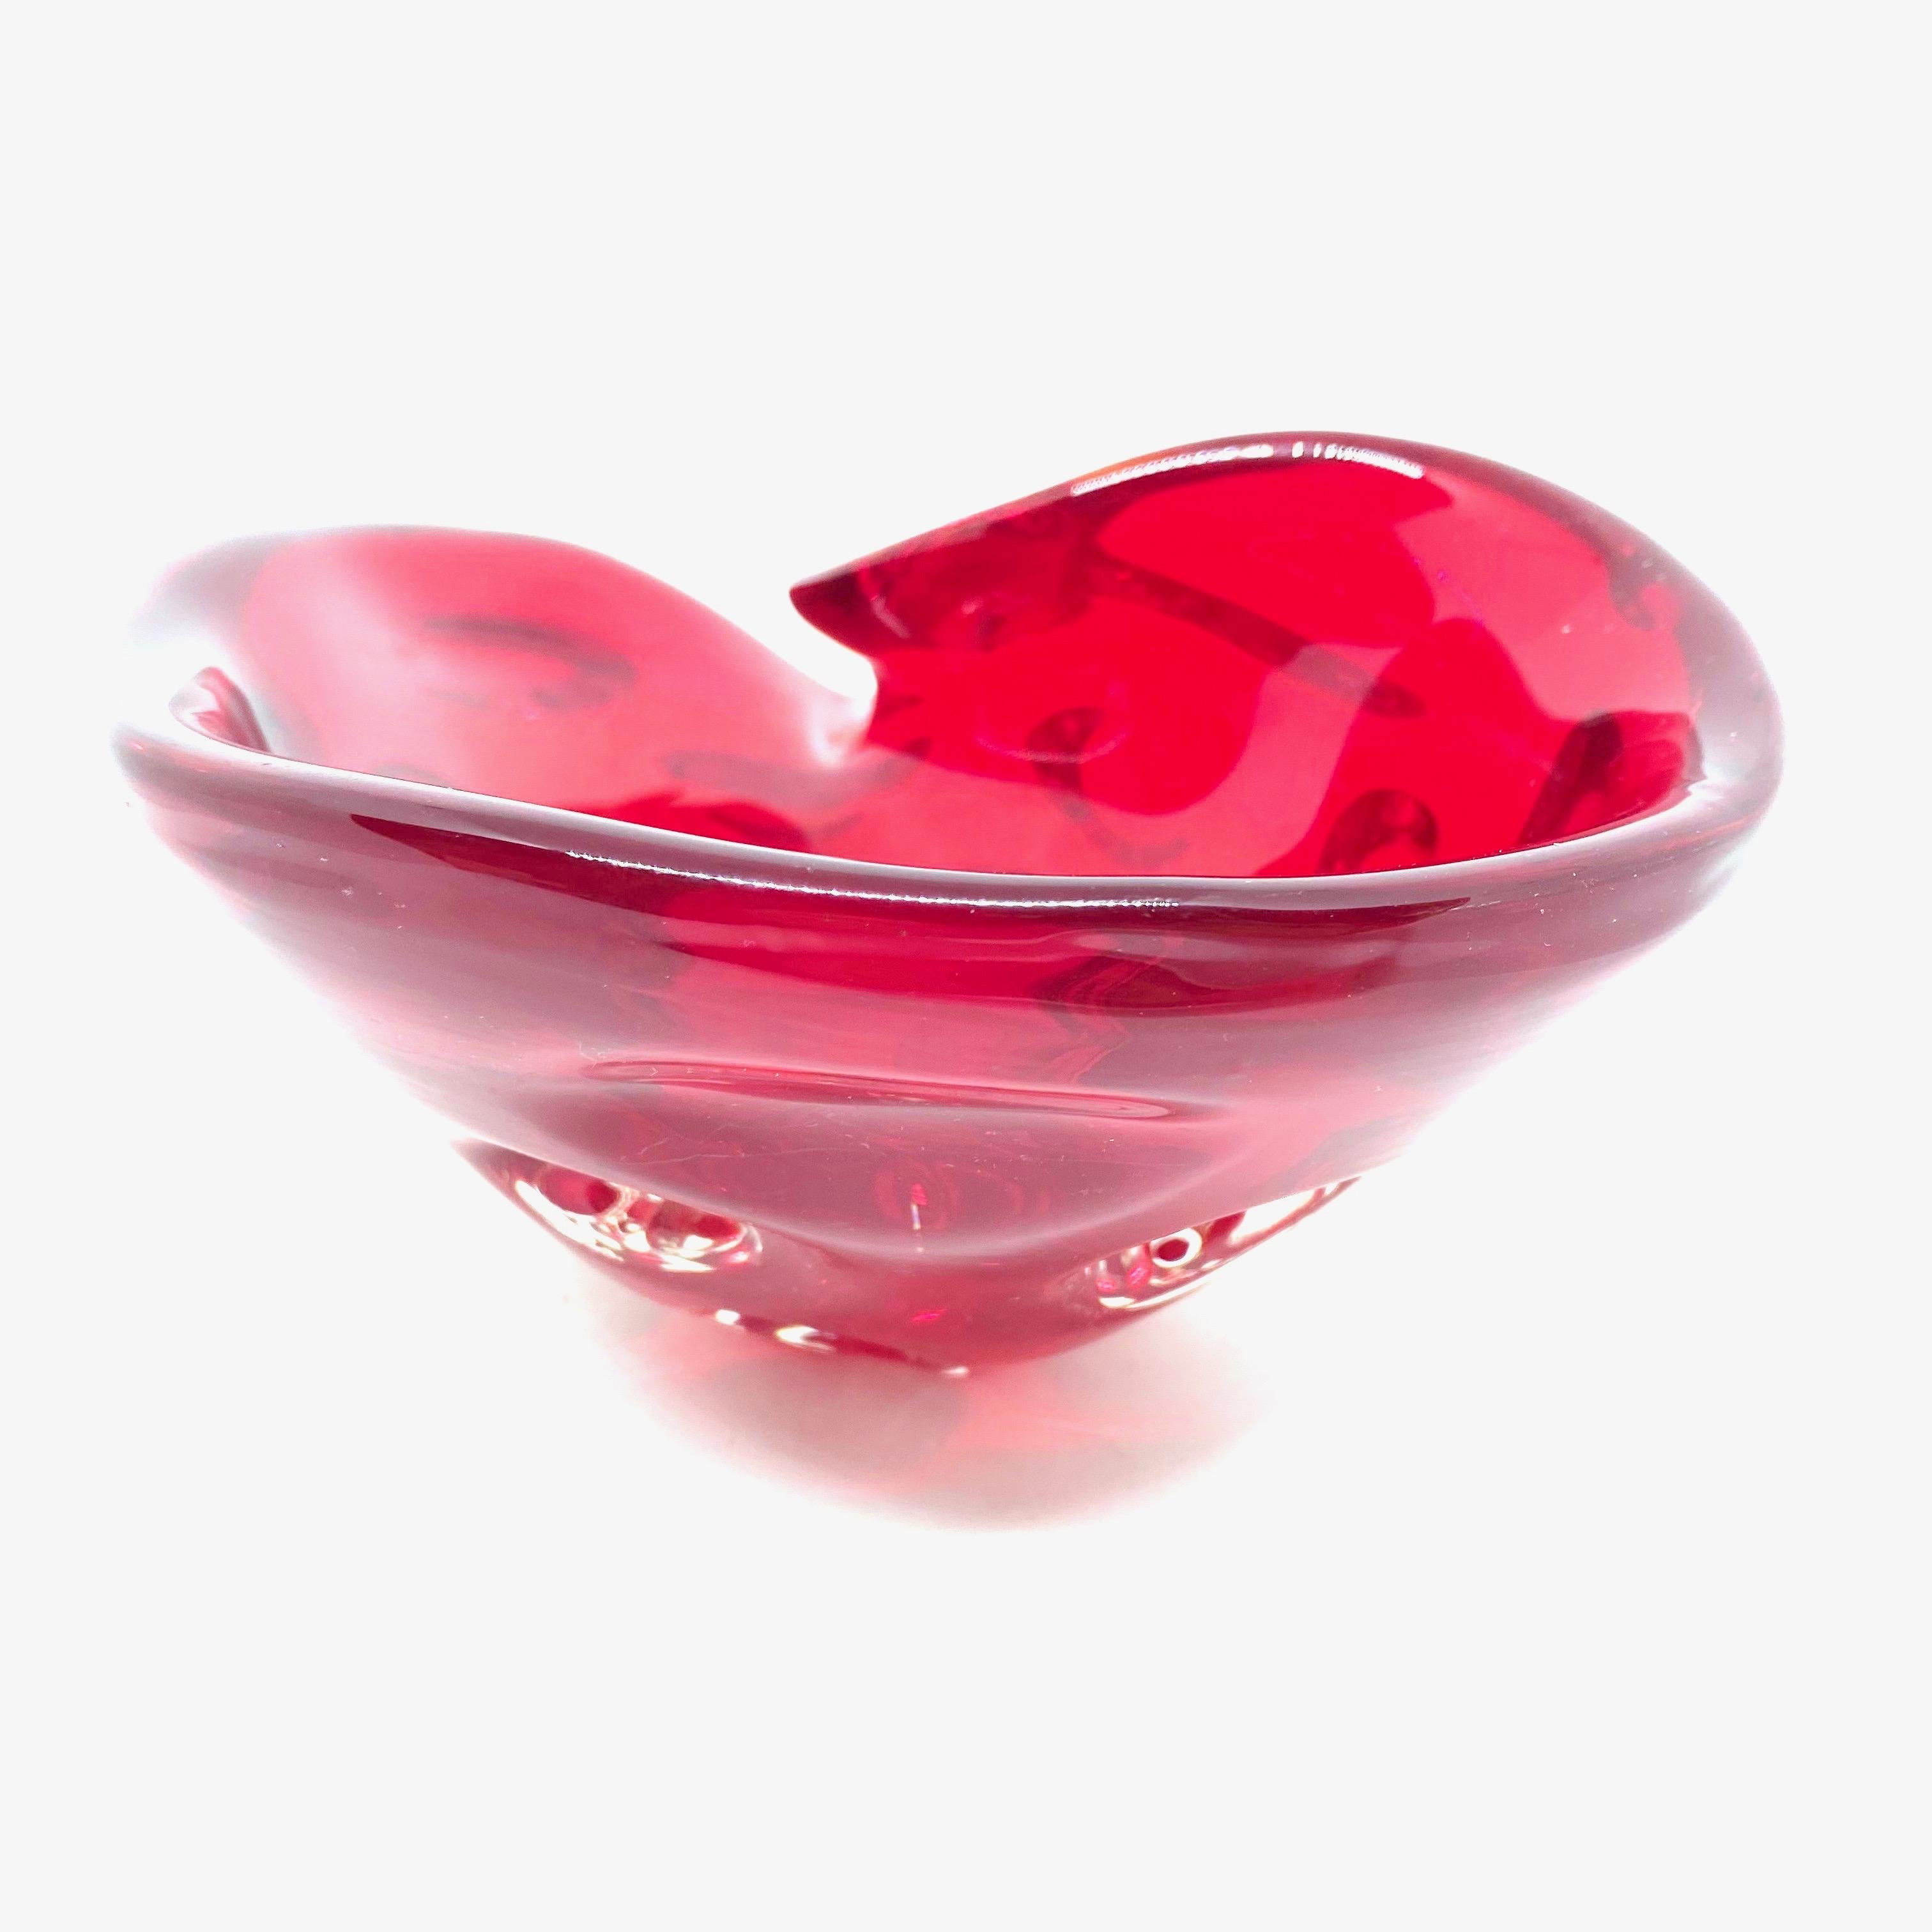 Organic Modern Murano Sommerso Conch Sea Shell Glass Bowl Catchall Red, Vintage, Italy, 1970s